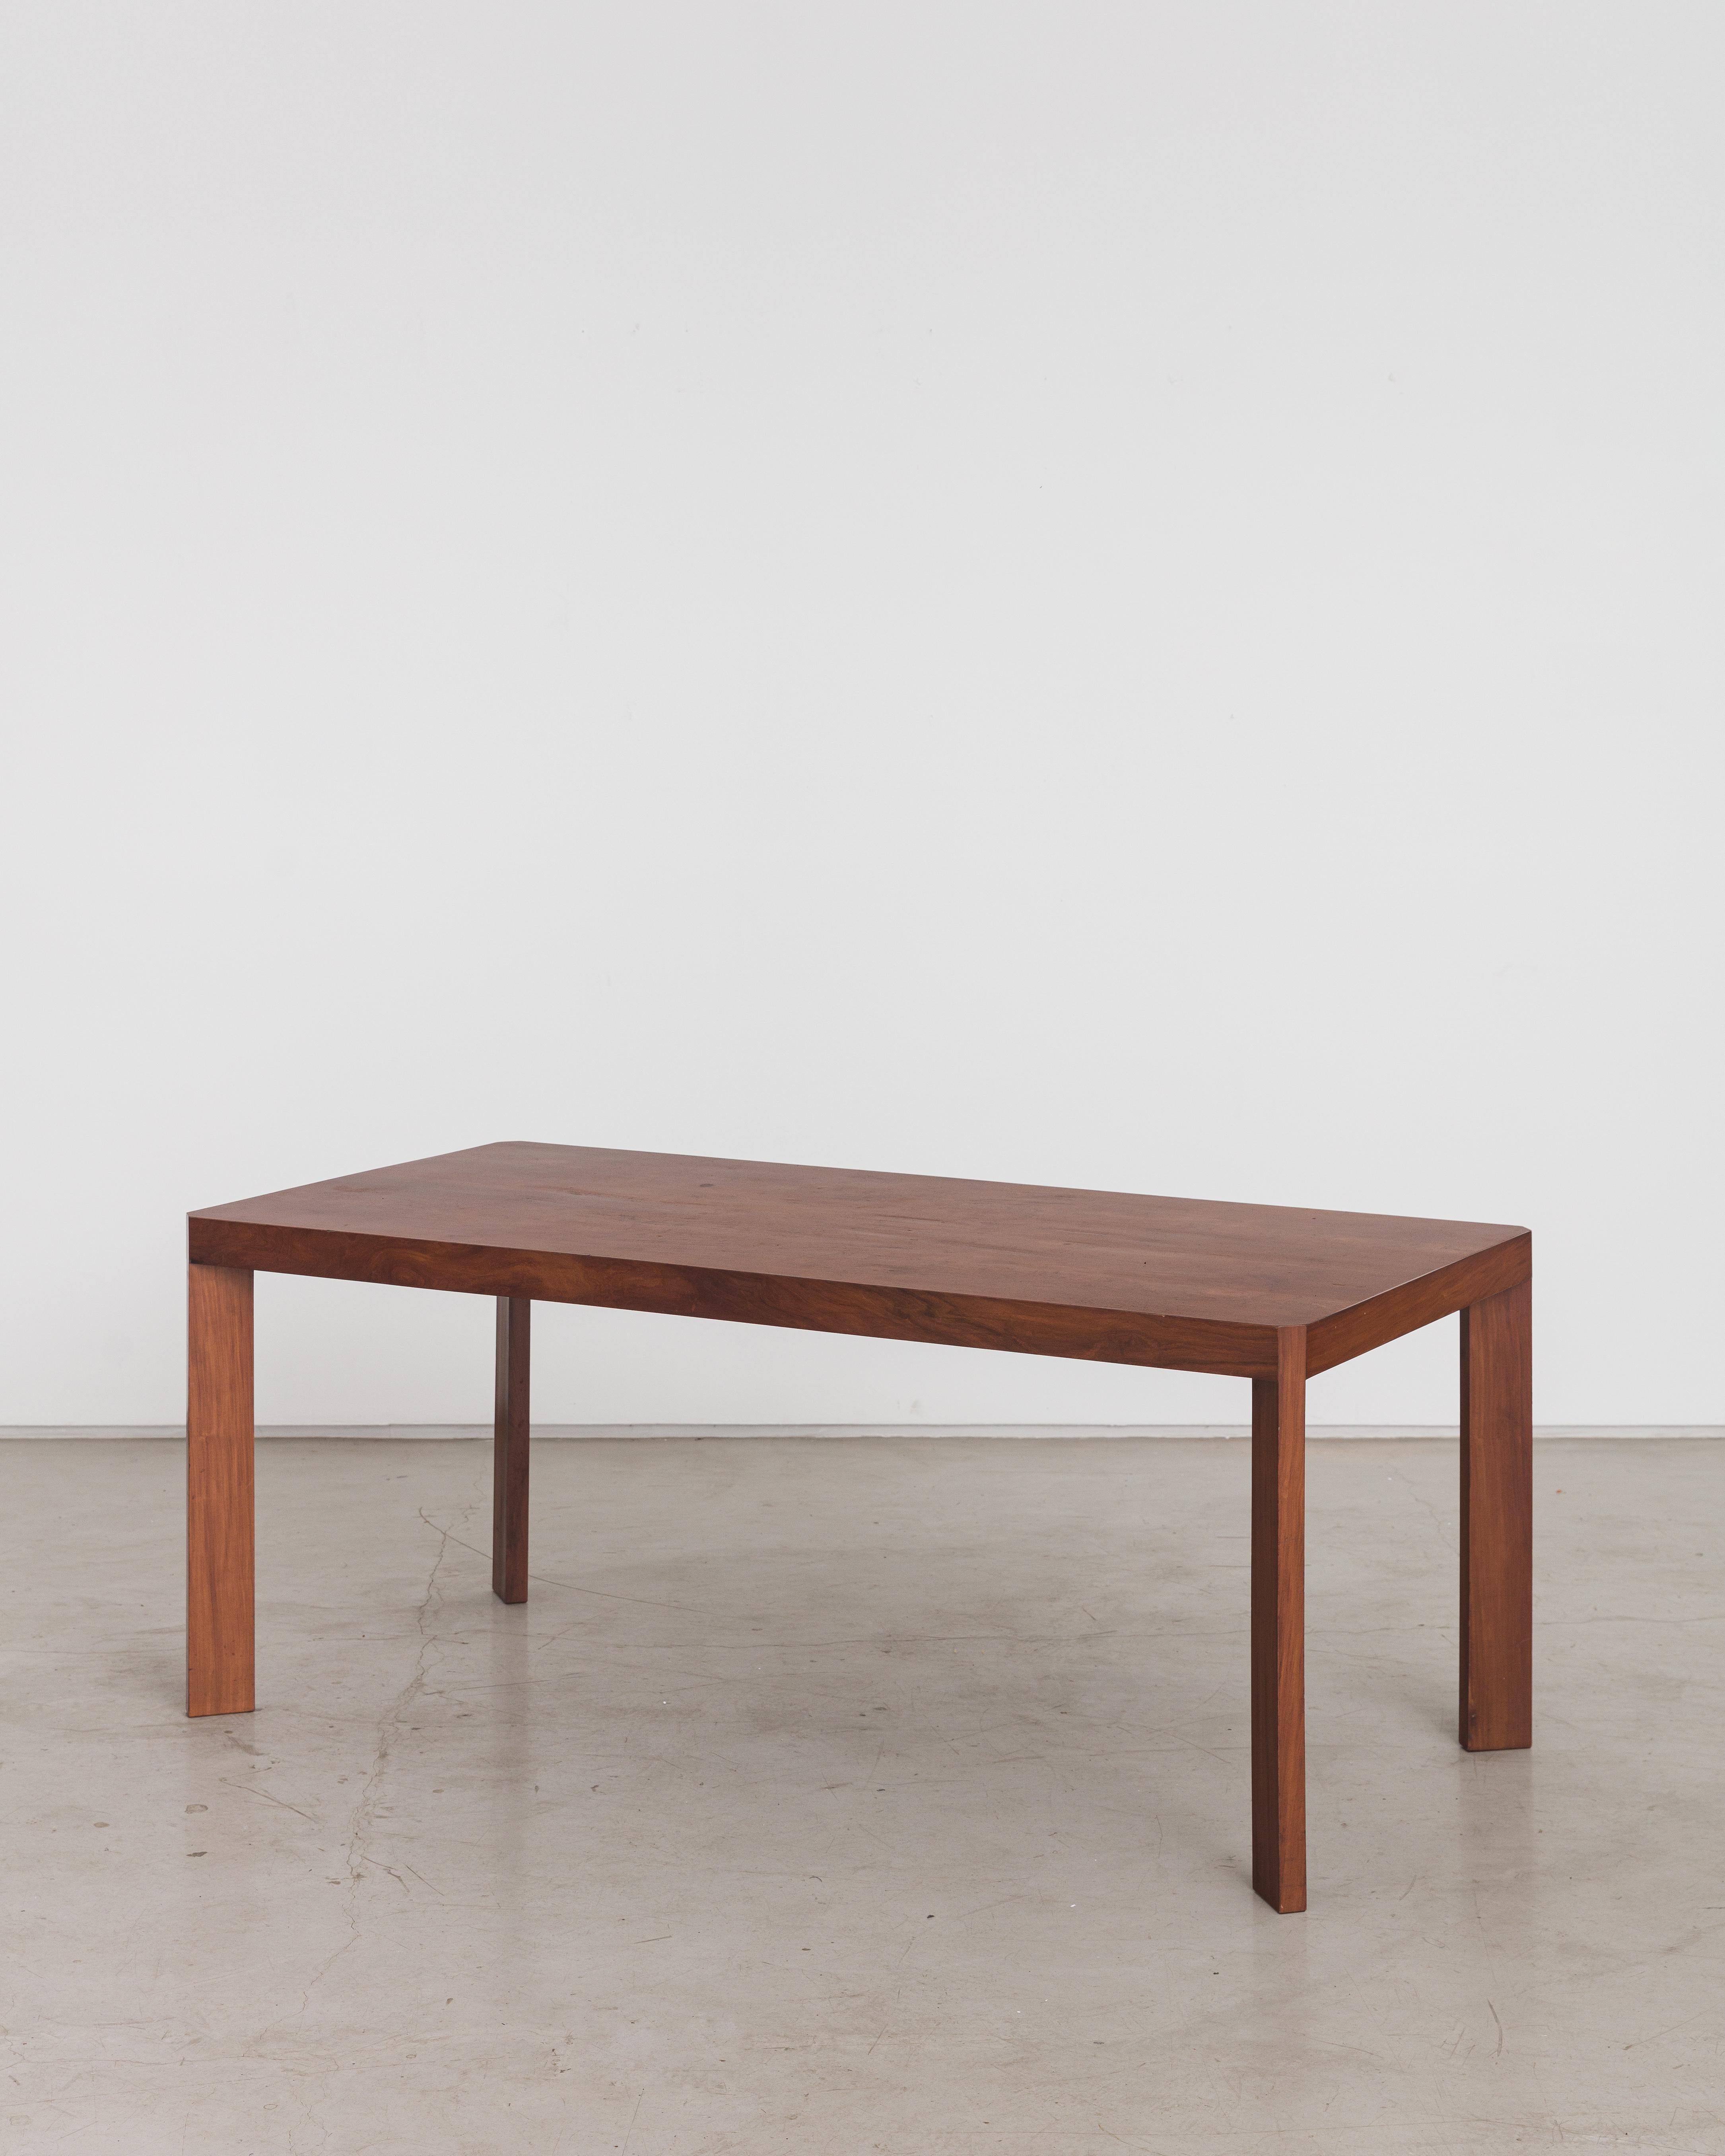 This stunning Caviúna piece was designed by Joaquim Tenreiro and produced in 1968 by one of his companies, located in Rio de Janeiro. Its simple design stands out with the subtle detail of the rectangular-shaped feet, positioned diagonally and